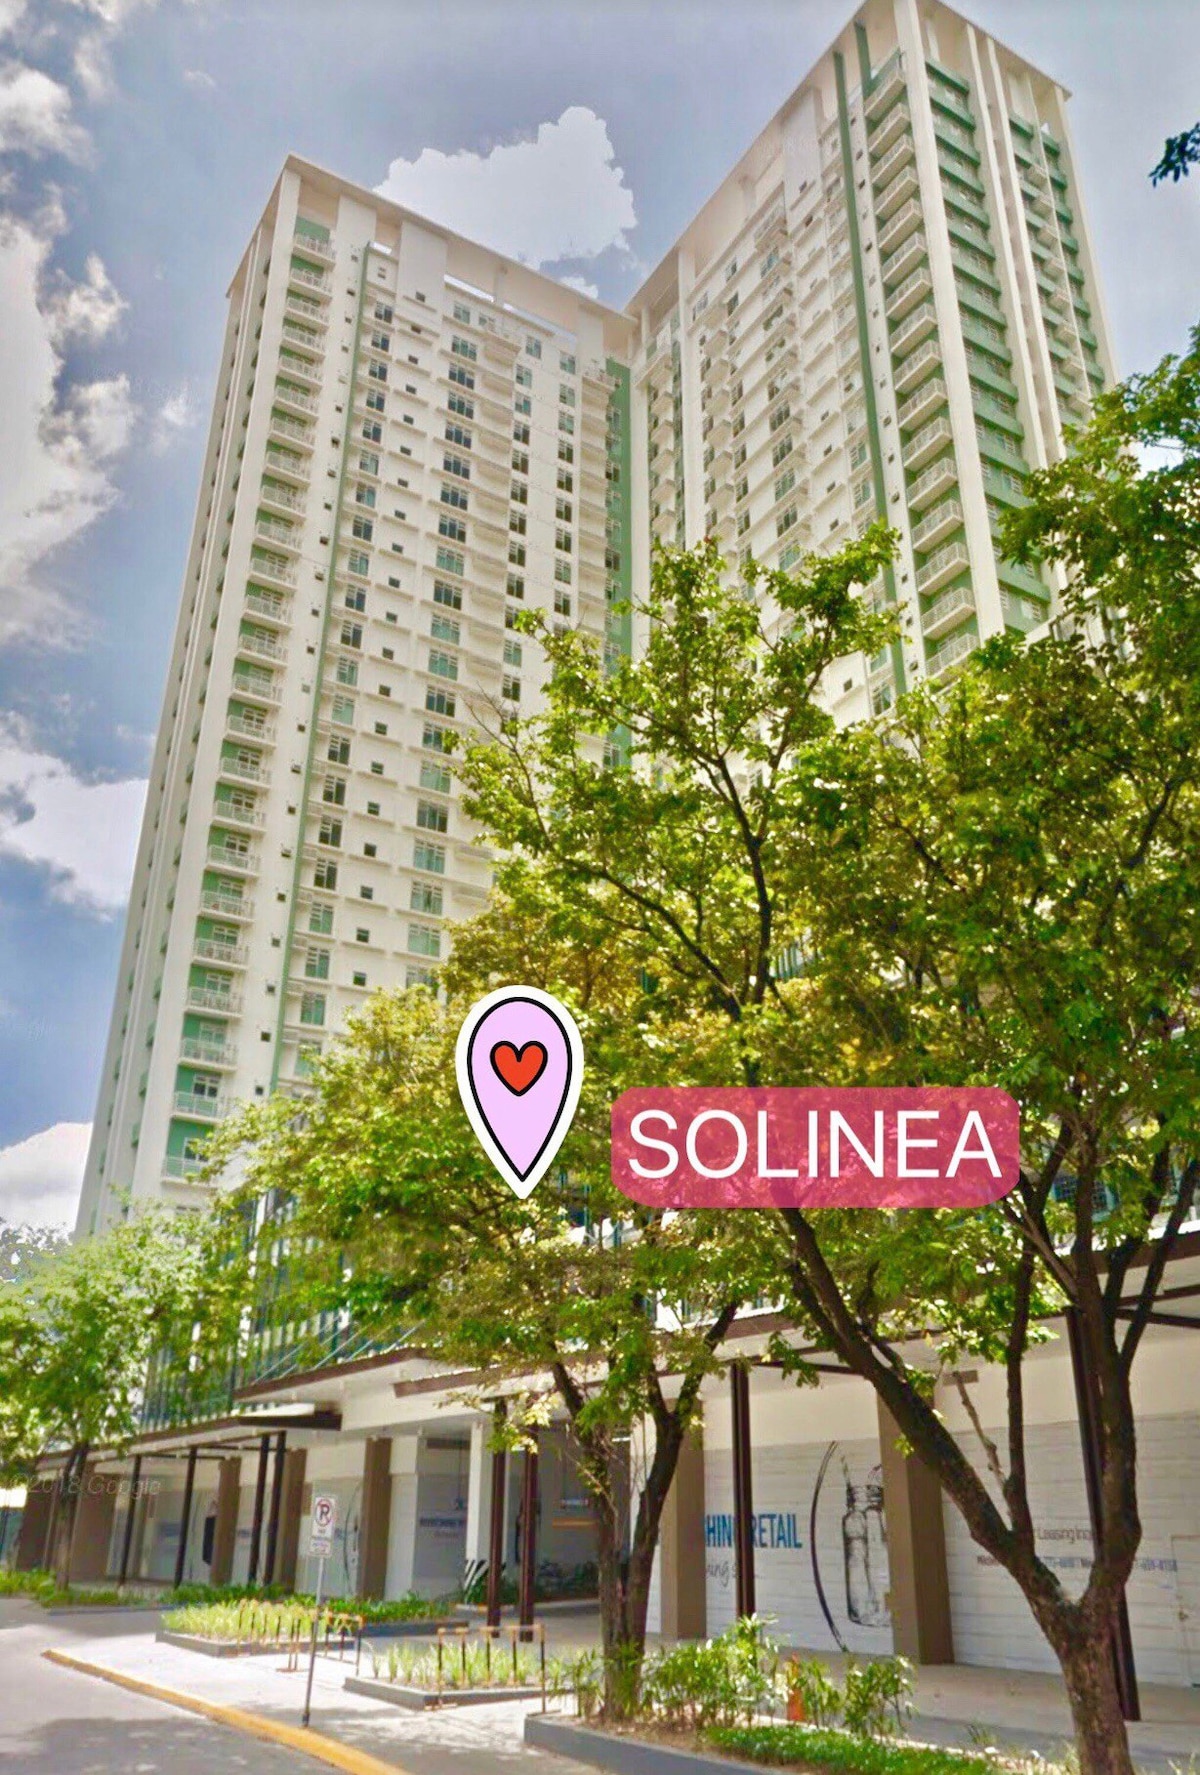 WeLcOme tO SoLinEa ！我的hOme iS y我们的hOme ！ < 3